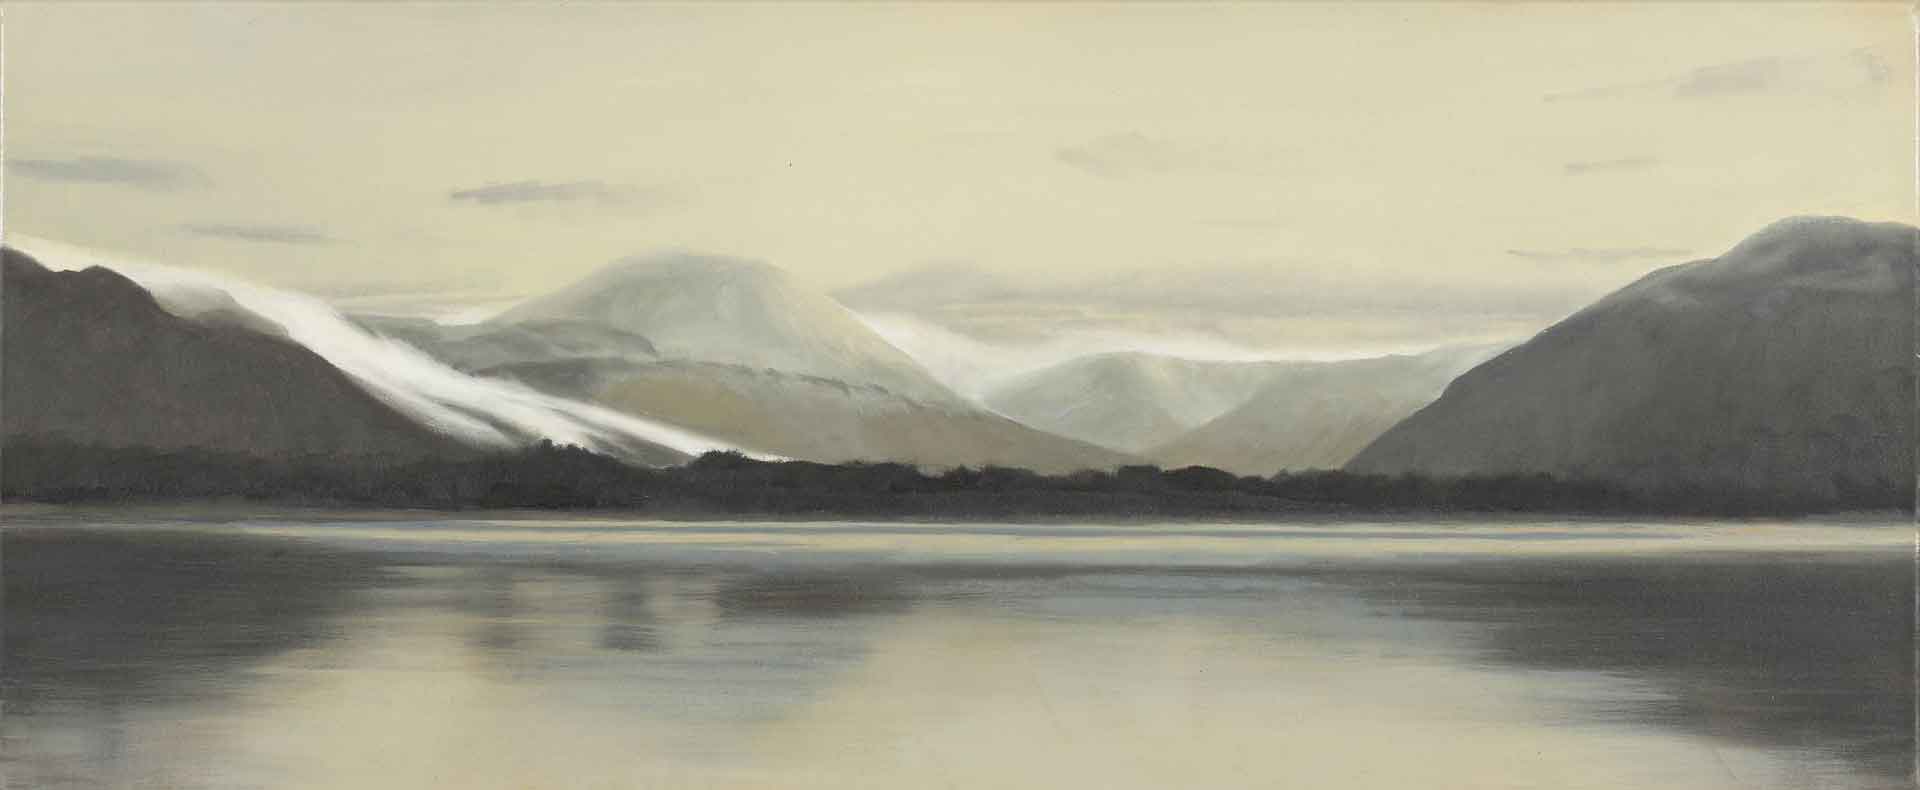 Icy Fog on Ben Moor. Landscape Painting by Victoria Orr Ewing